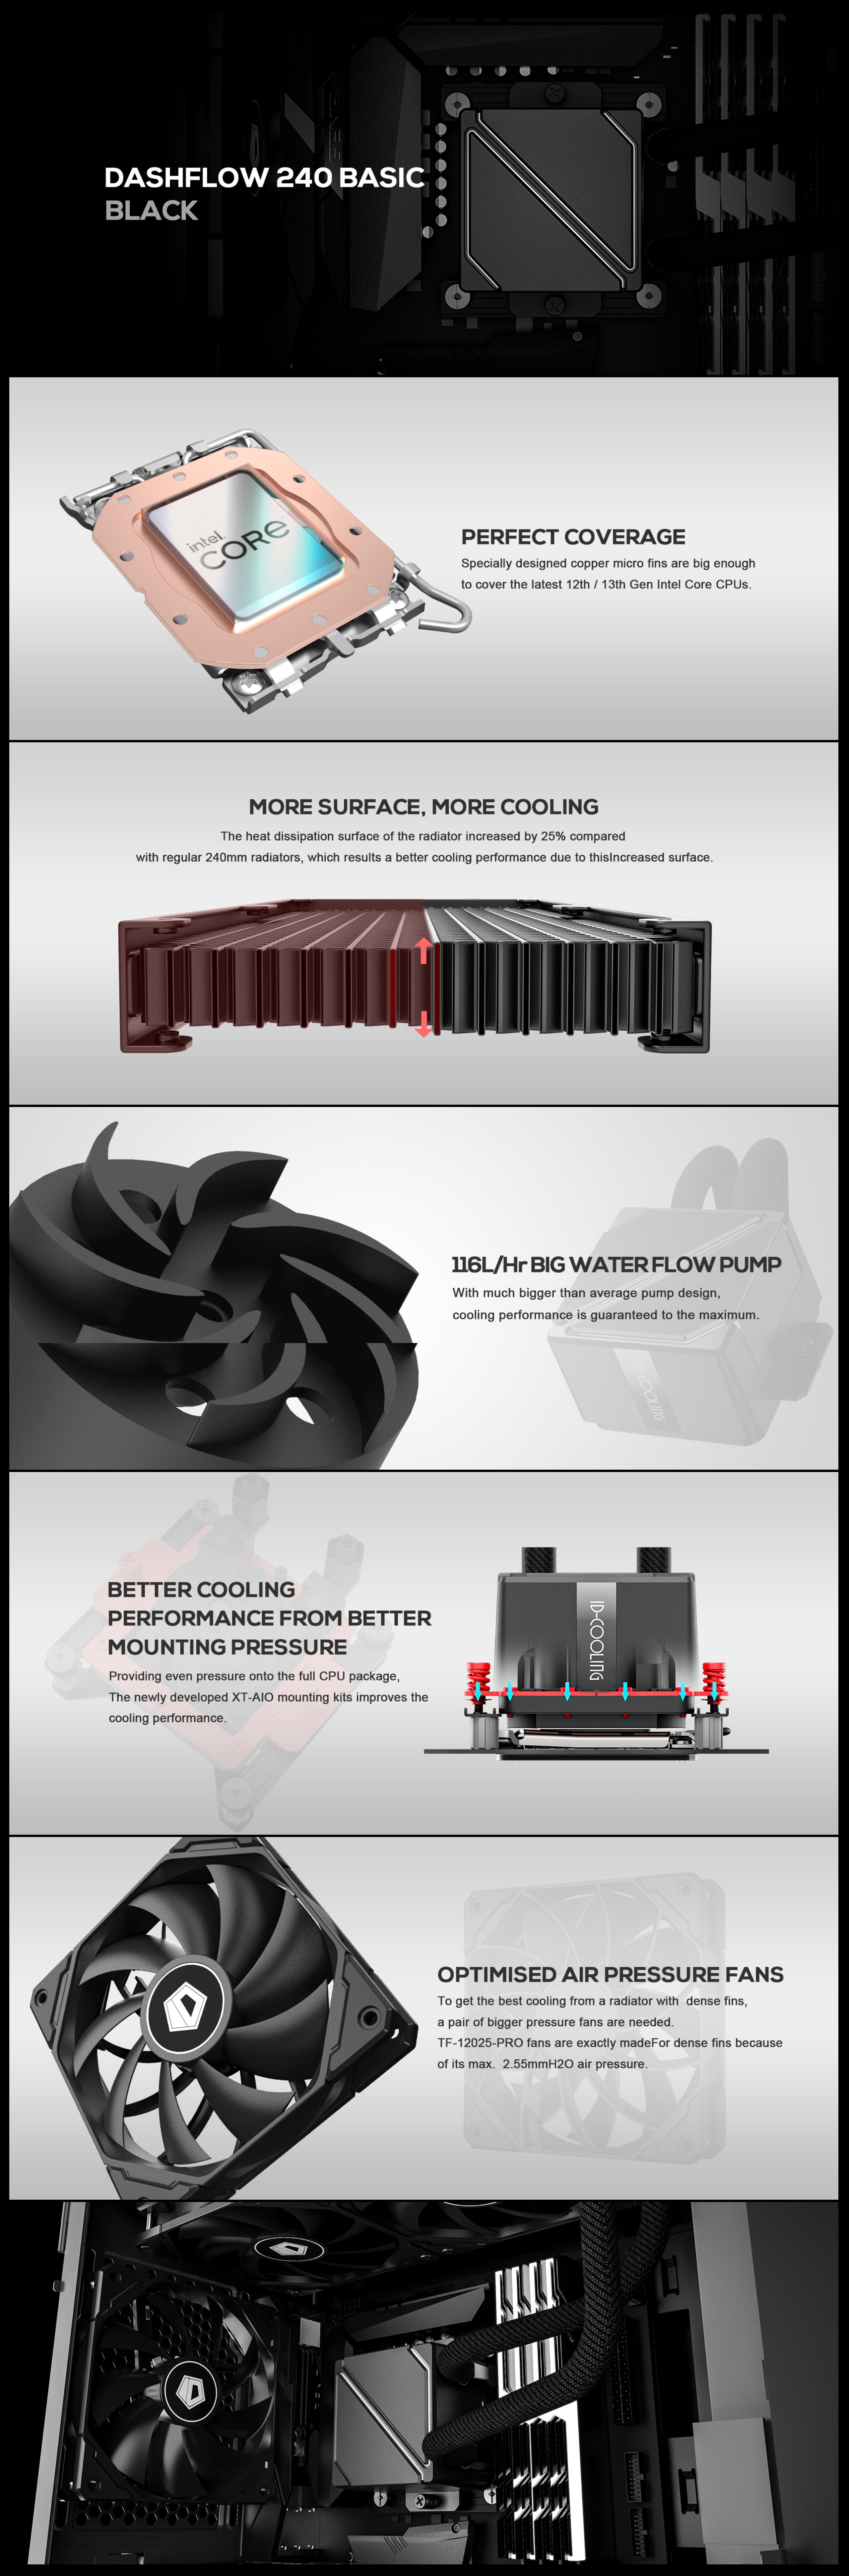 A large marketing image providing additional information about the product ID-COOLING DashFlow 240 Basic 240mm AIO CPU Cooler - Black - Additional alt info not provided